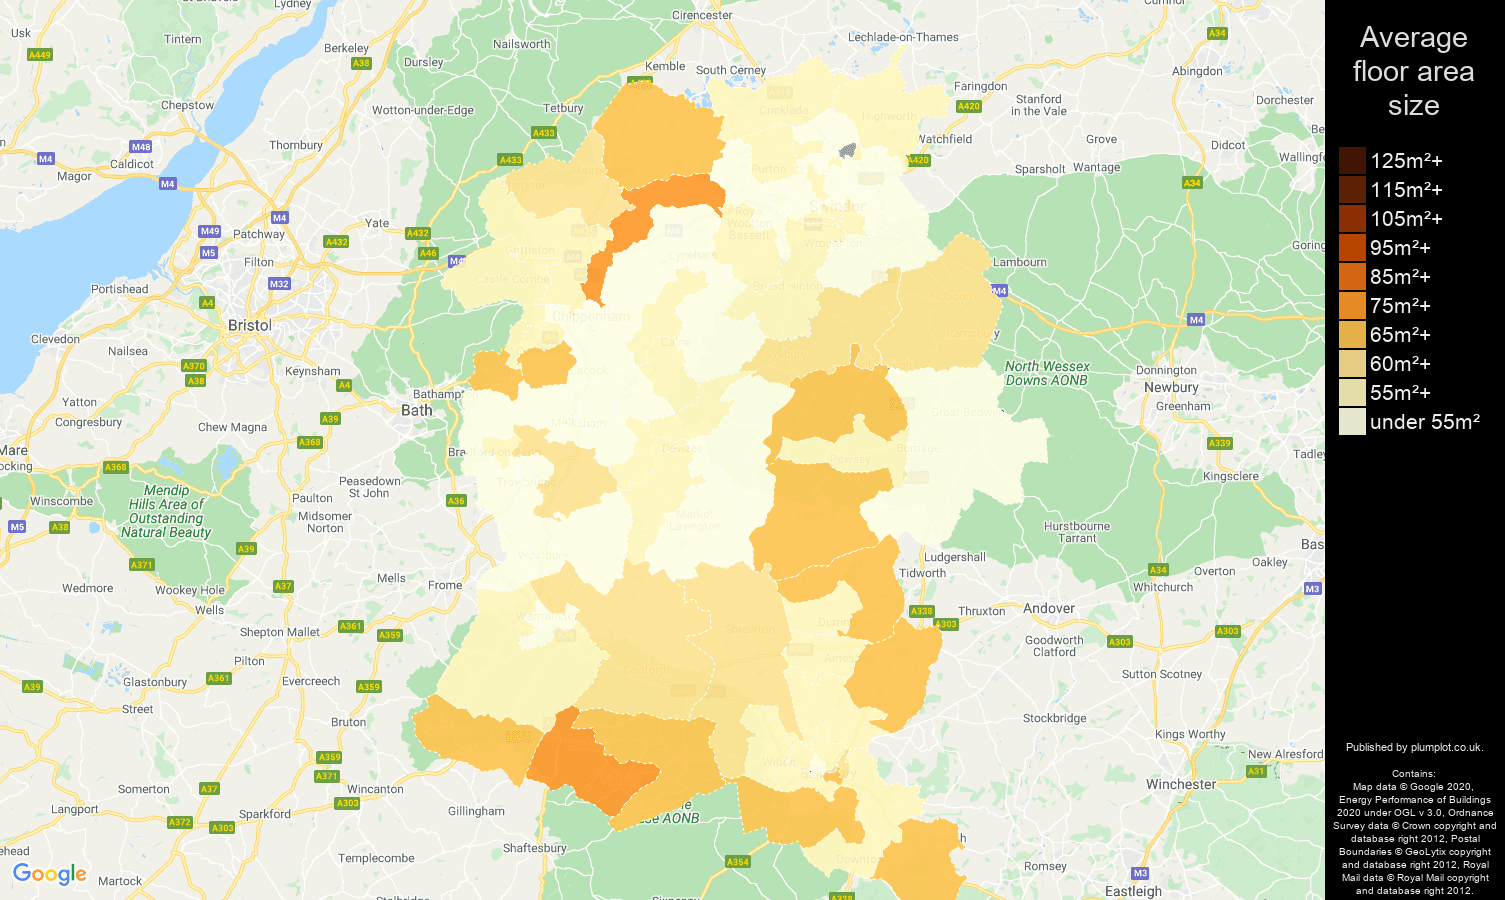 Wiltshire map of average floor area size of flats